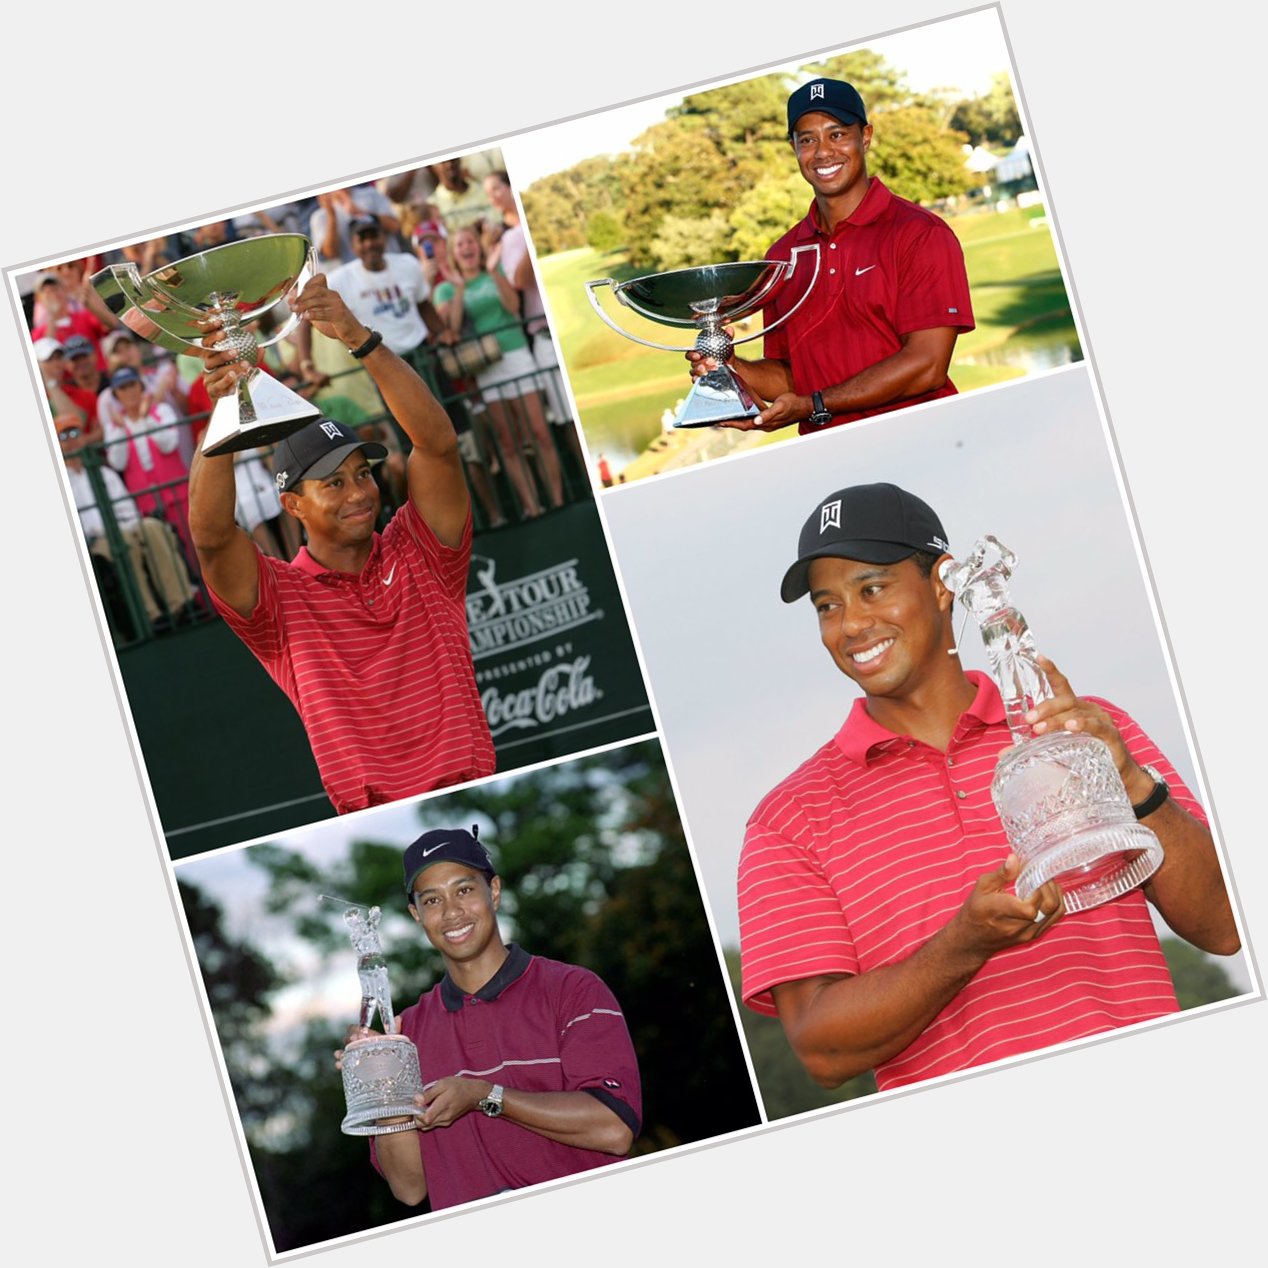 Join us in wishing two-time and winner, Tiger Woods a very happy 40th birthday! 